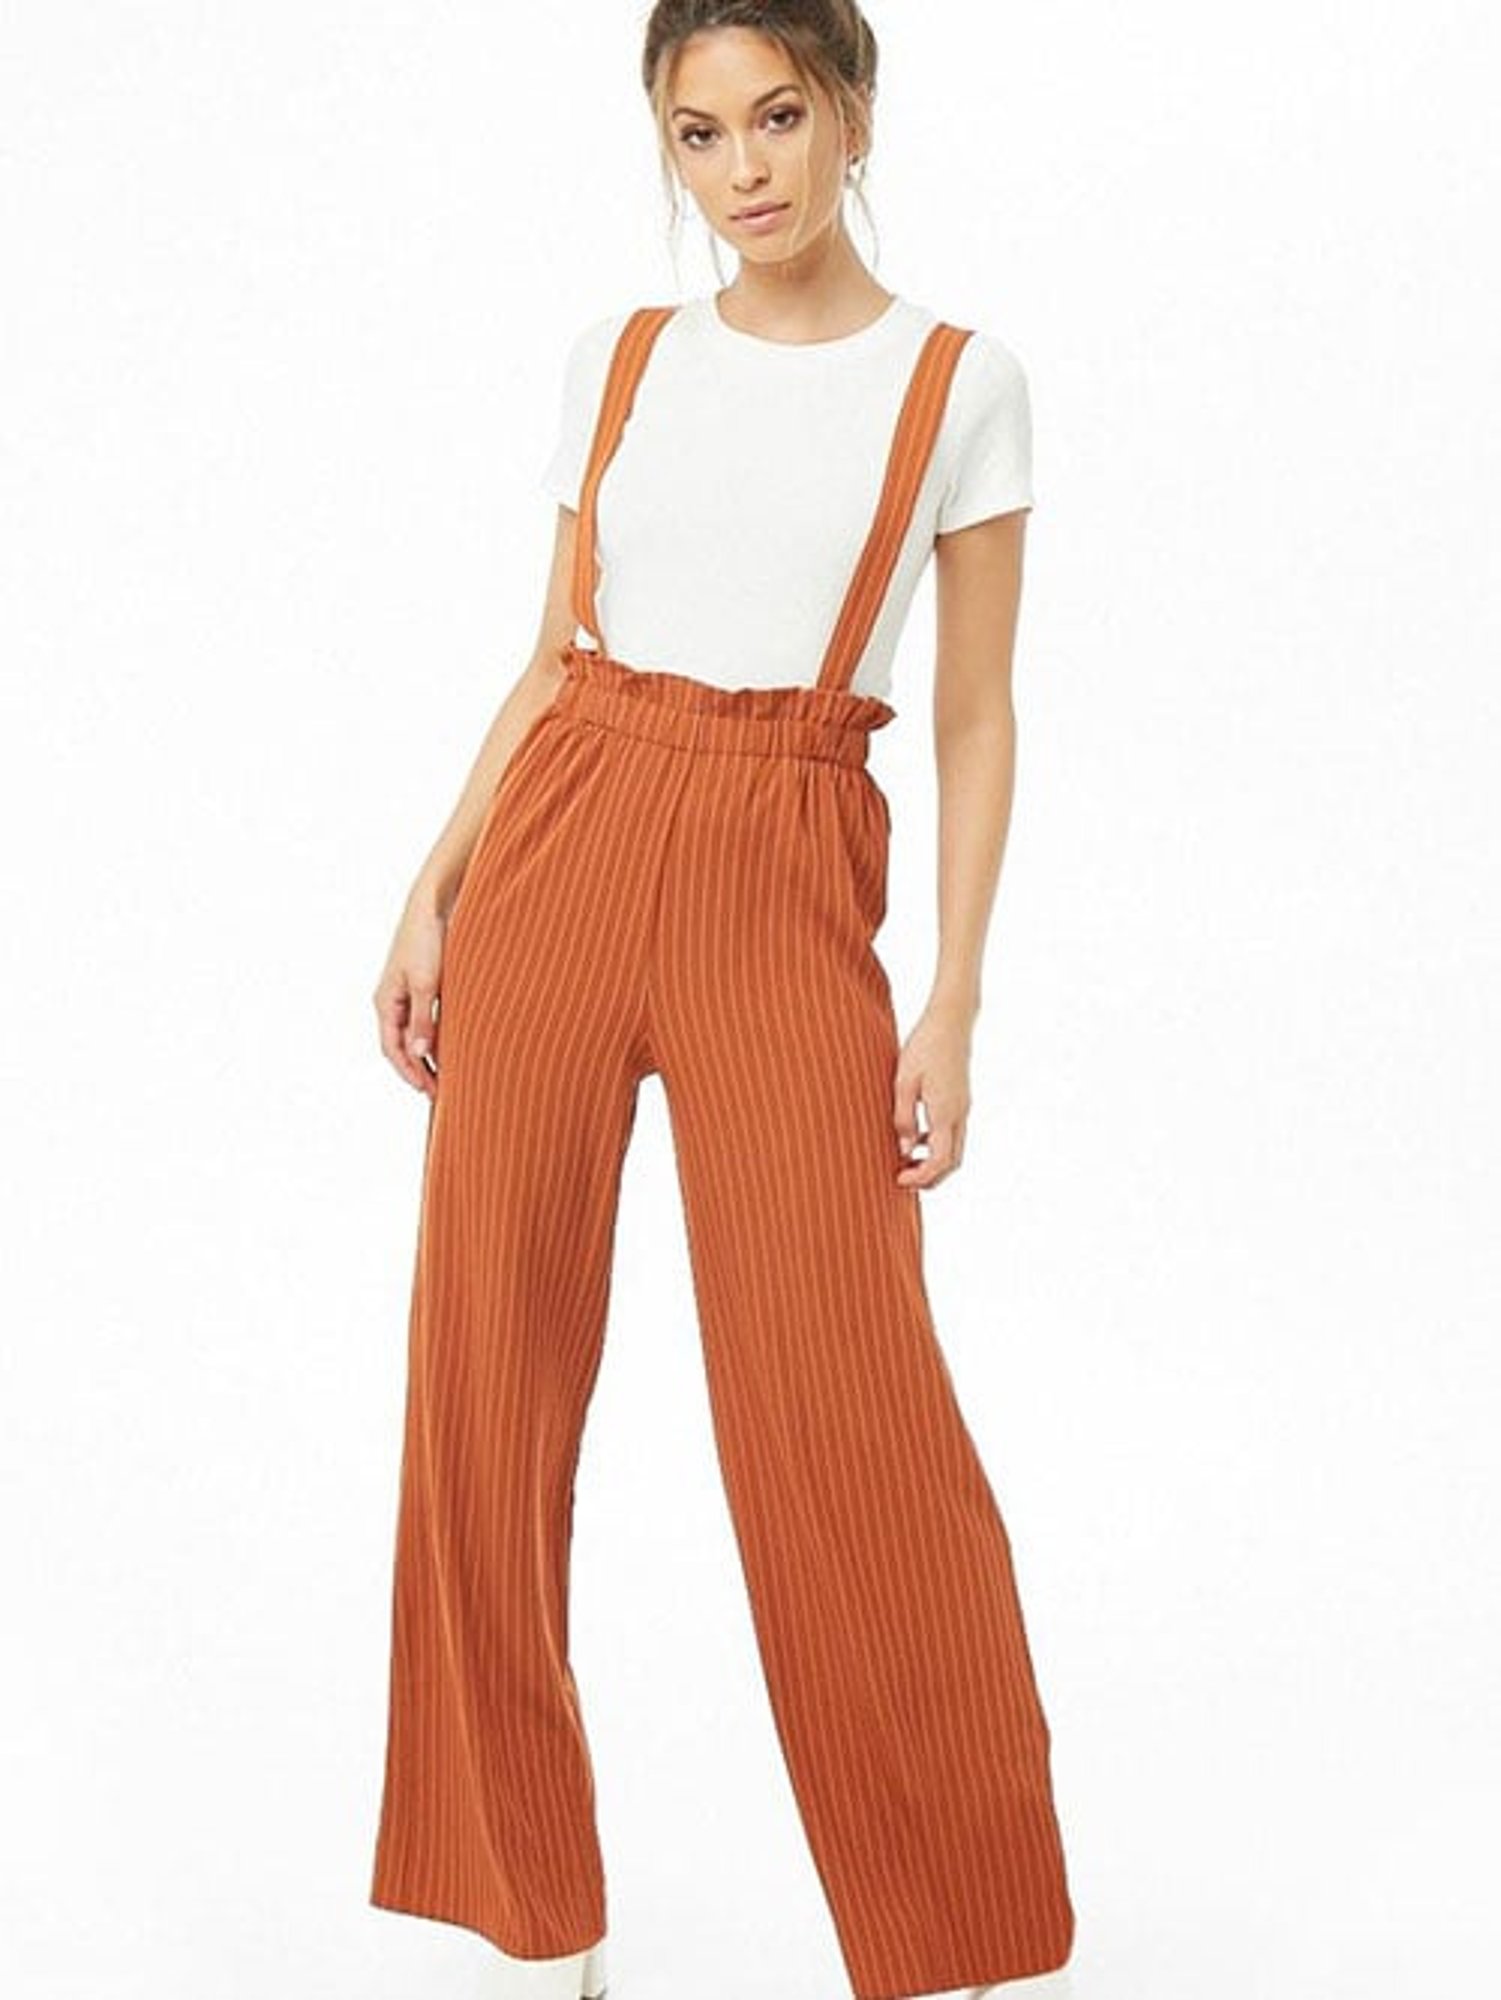 ROMWE Academia Striped Print Suspender Pants Without Shirt | SHEIN ASIA